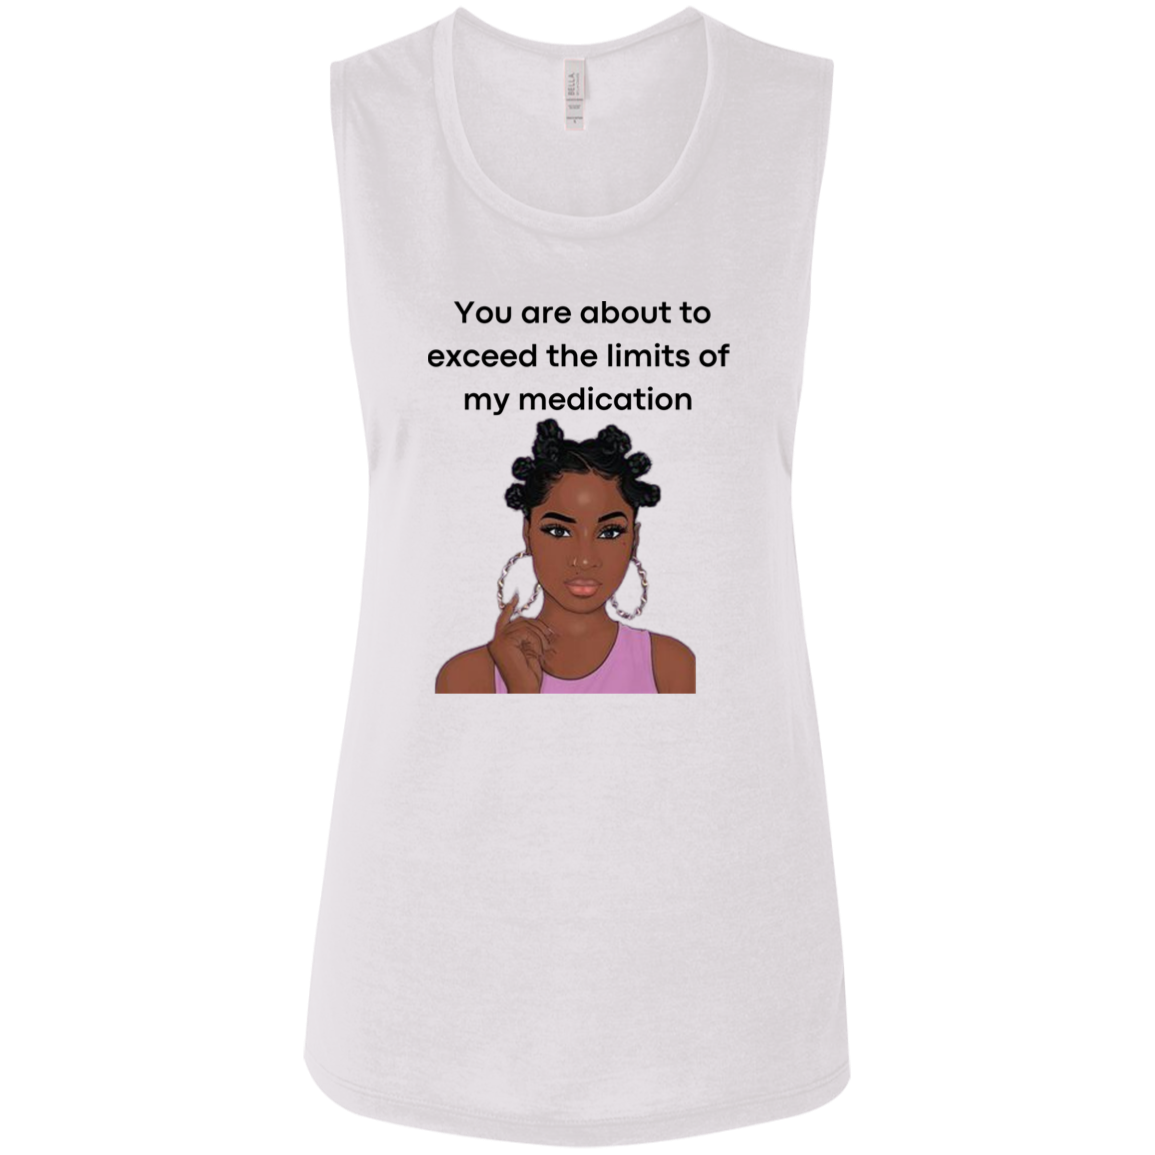 You Are About to Exceed the Limits of My Medication Ladies' Flowy Muscle Tank